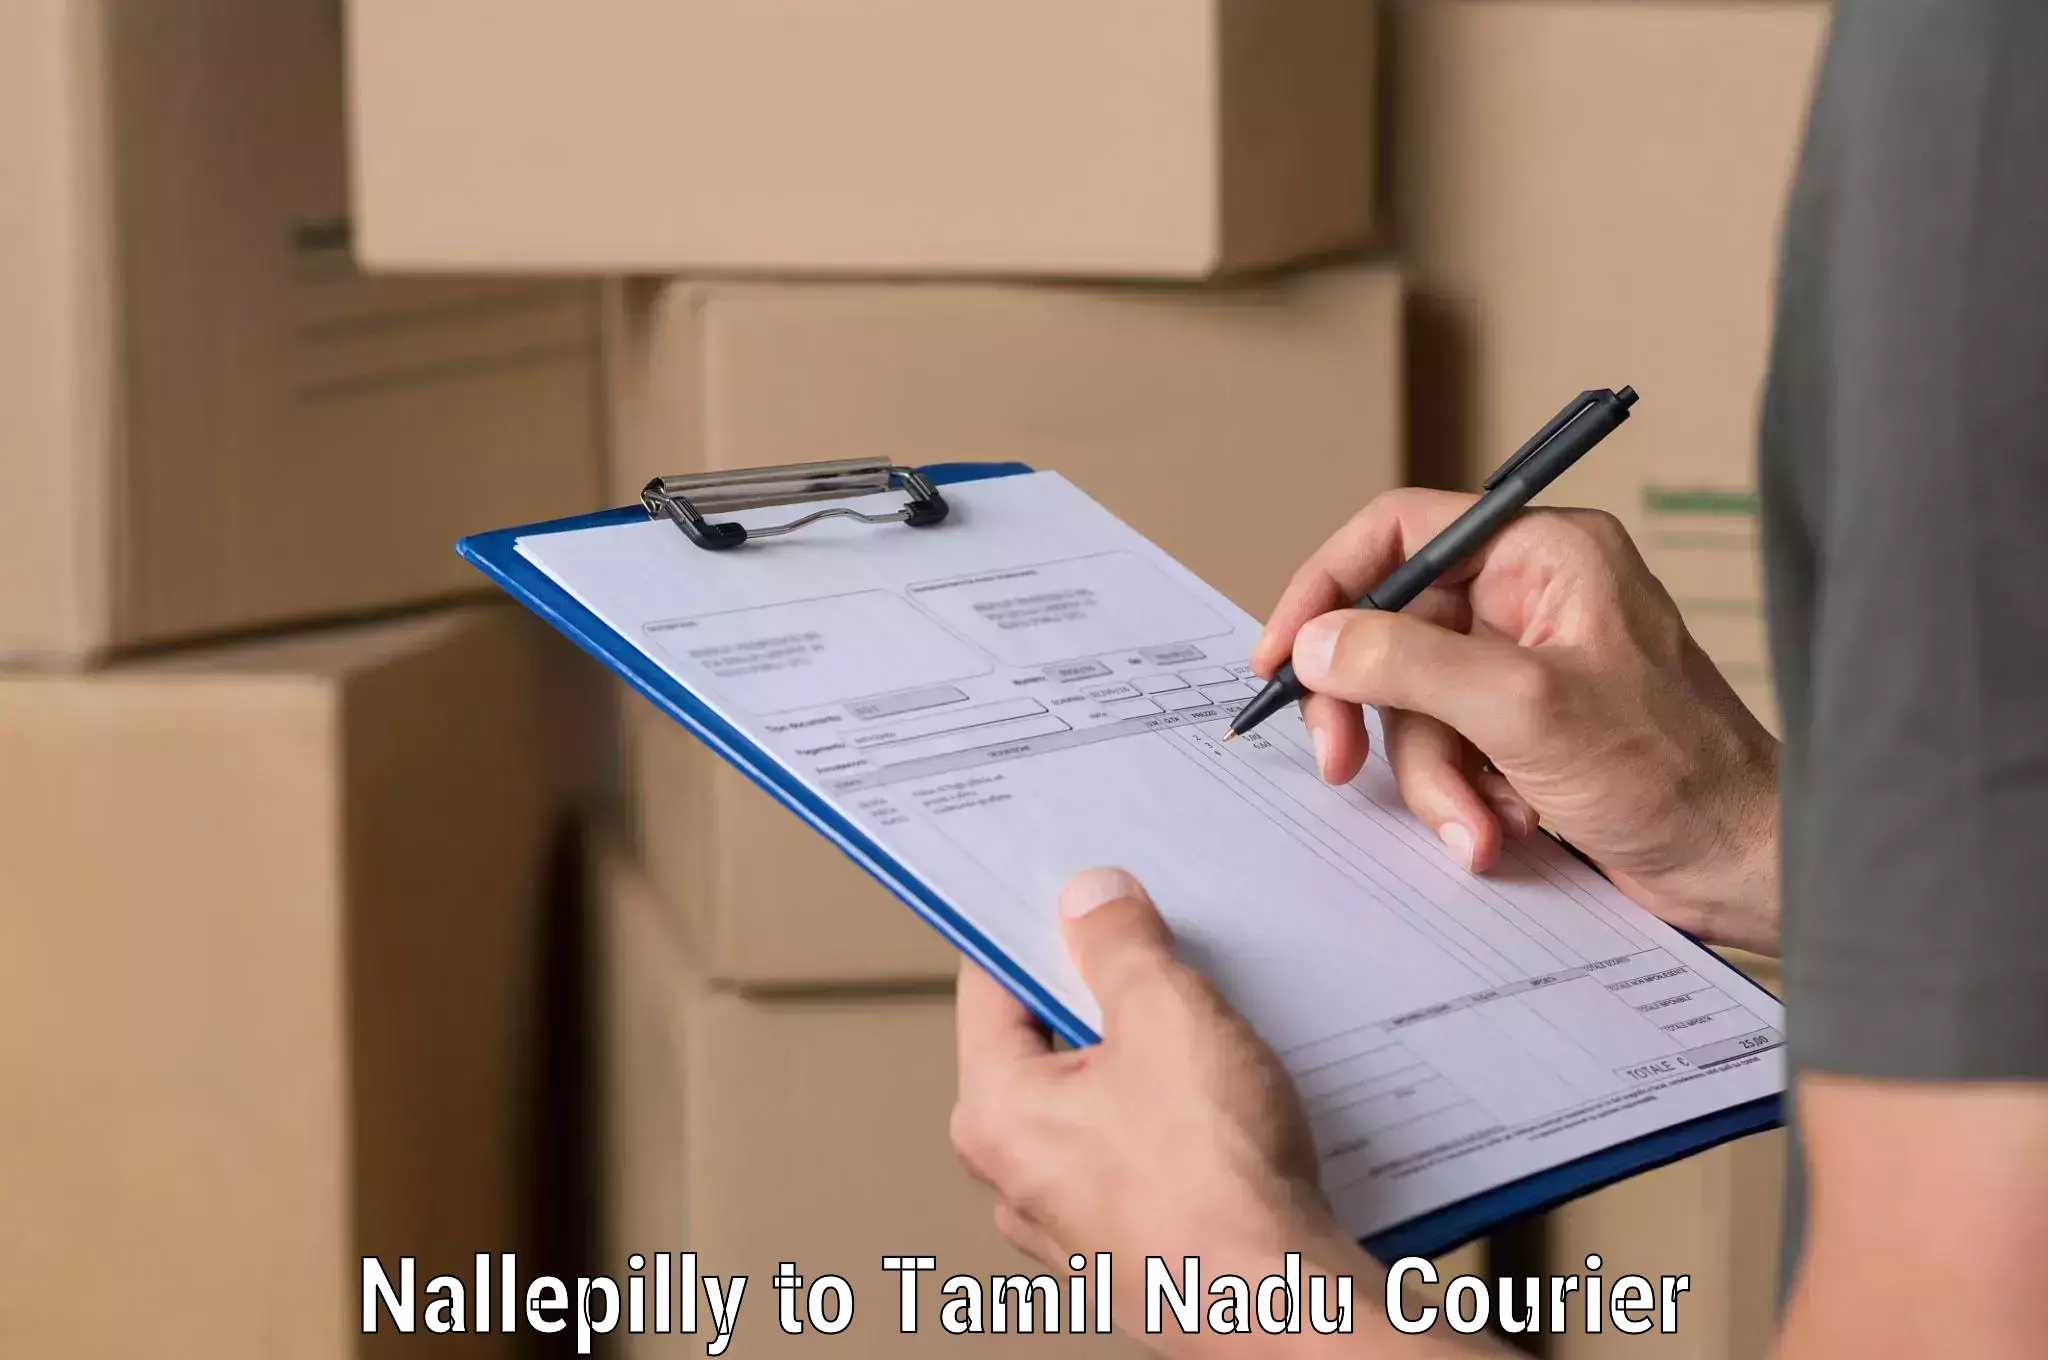 Express logistics providers Nallepilly to The Gandhigram Rural Institute